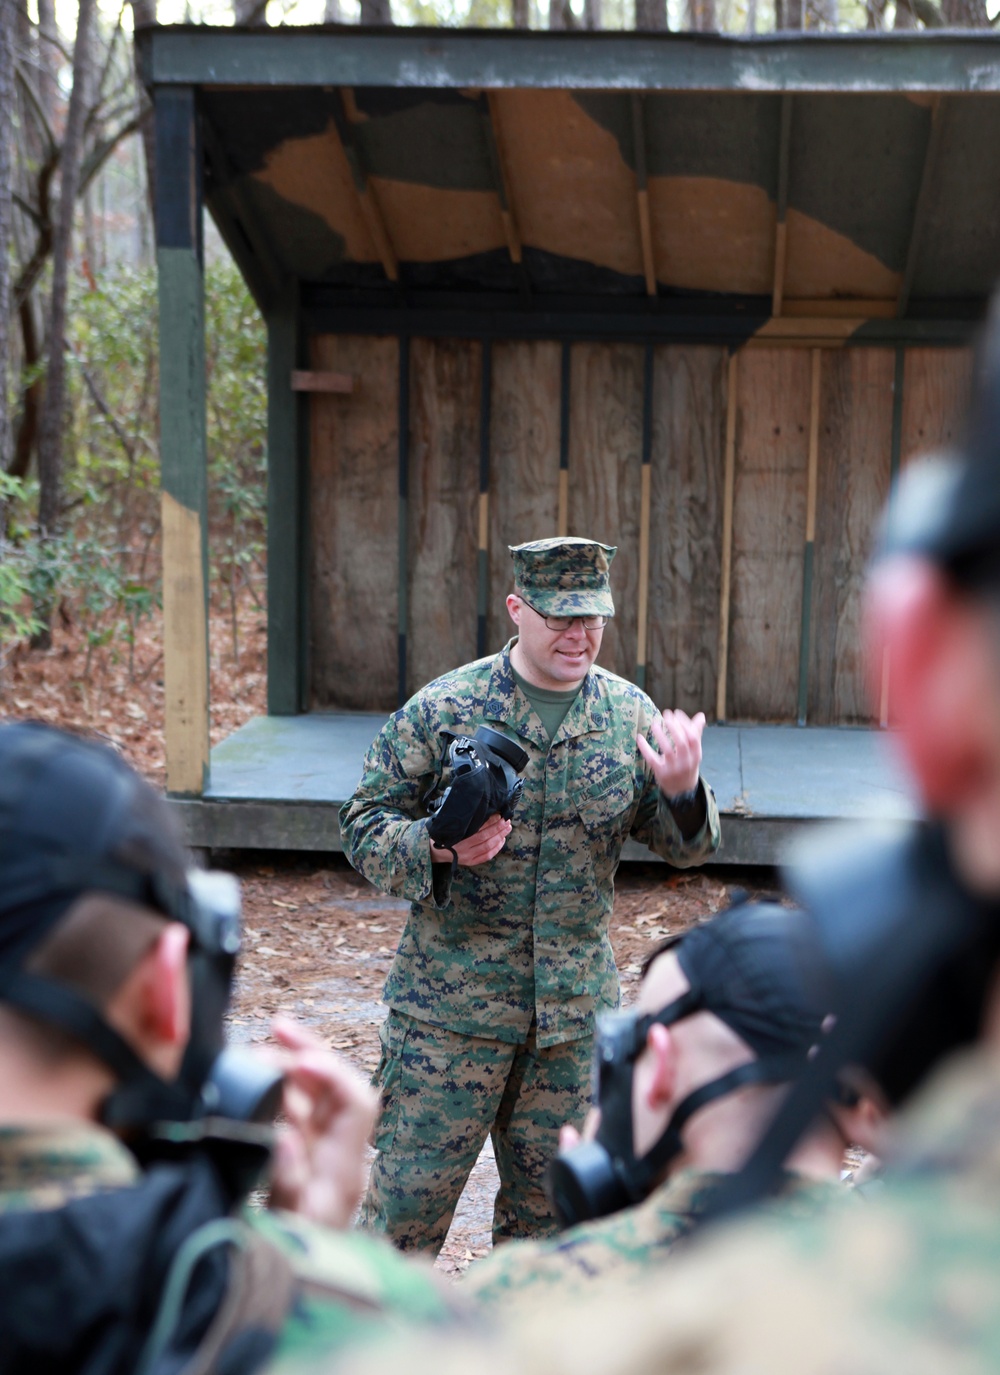 24th MEU Marines’ walk in the woods gets gaseous